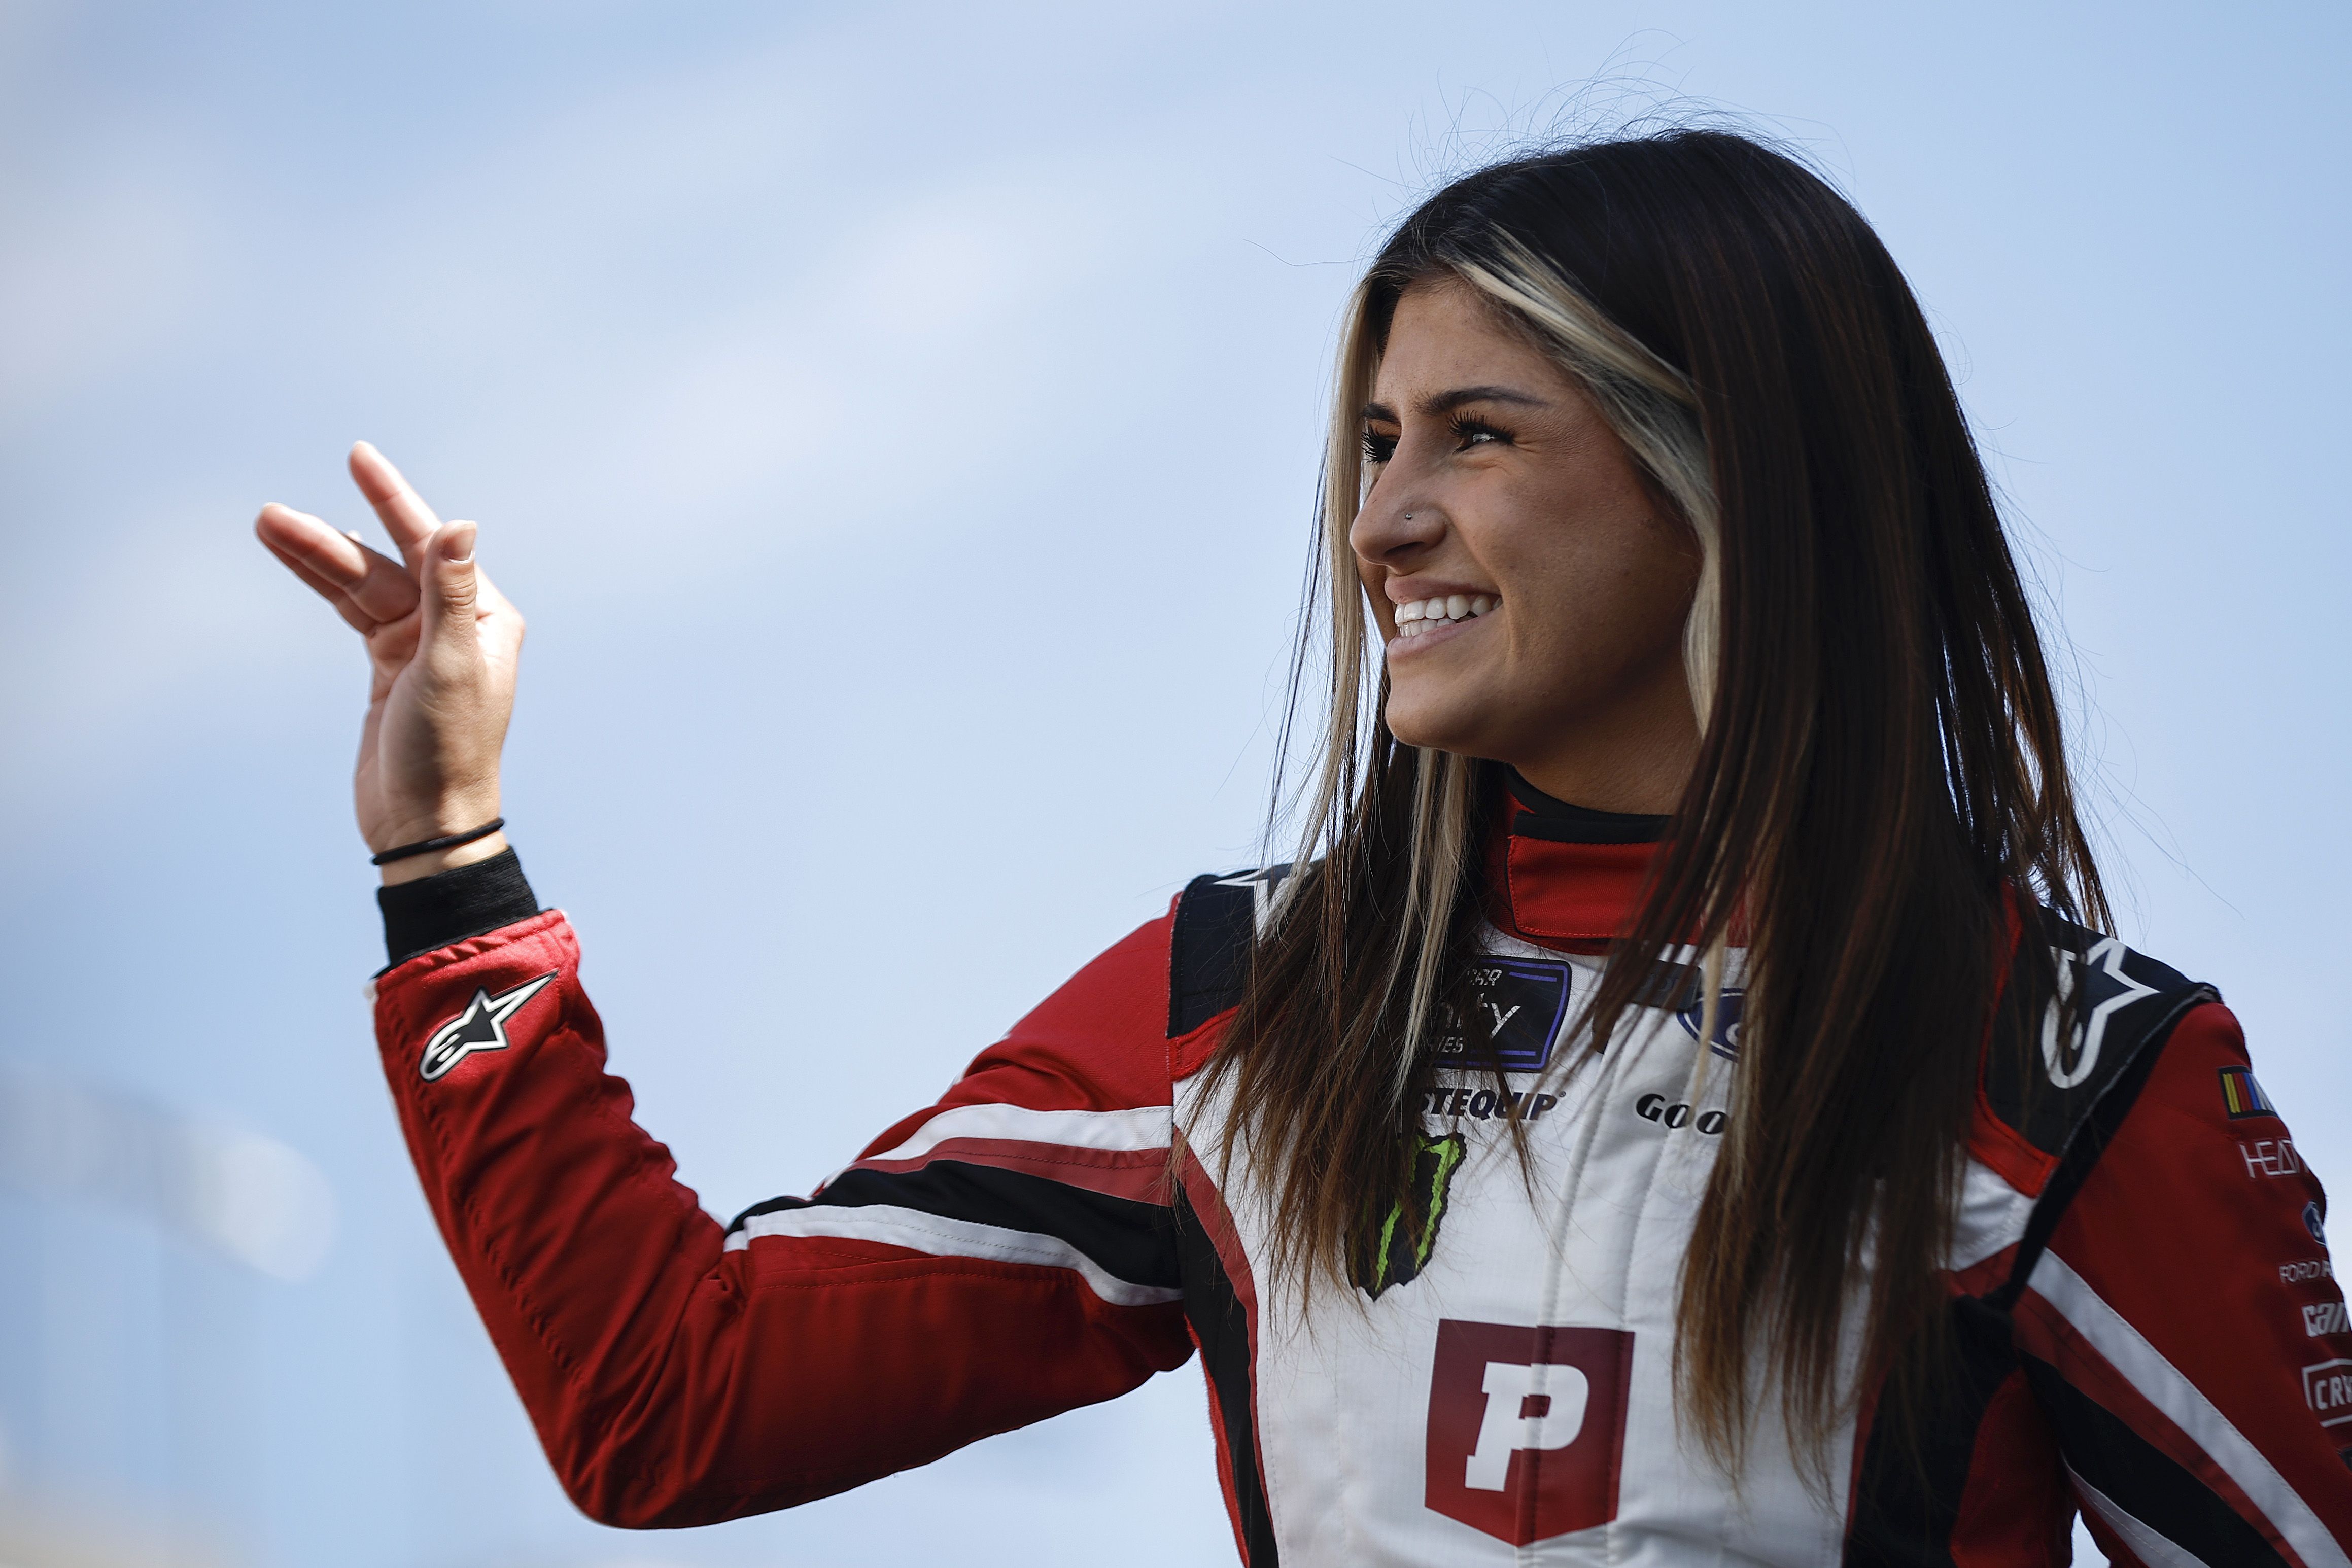 Hailie Deegan wearing her racing attire as she waves her hand